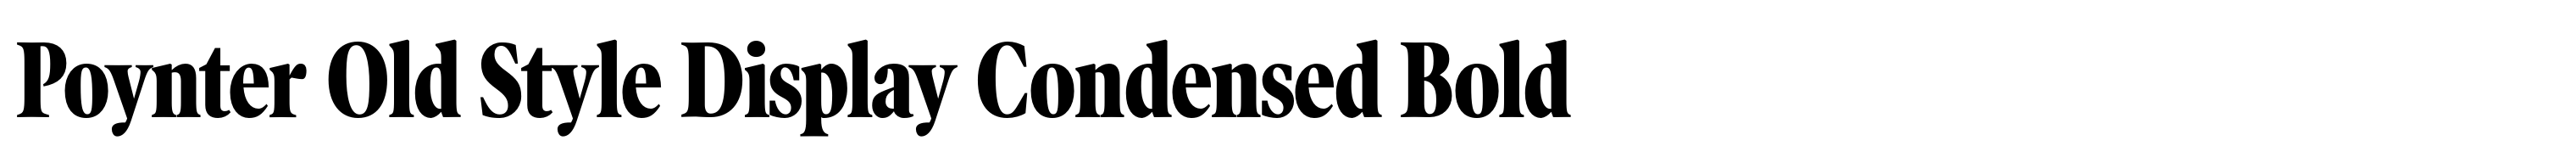 Poynter Old Style Display Condensed Bold